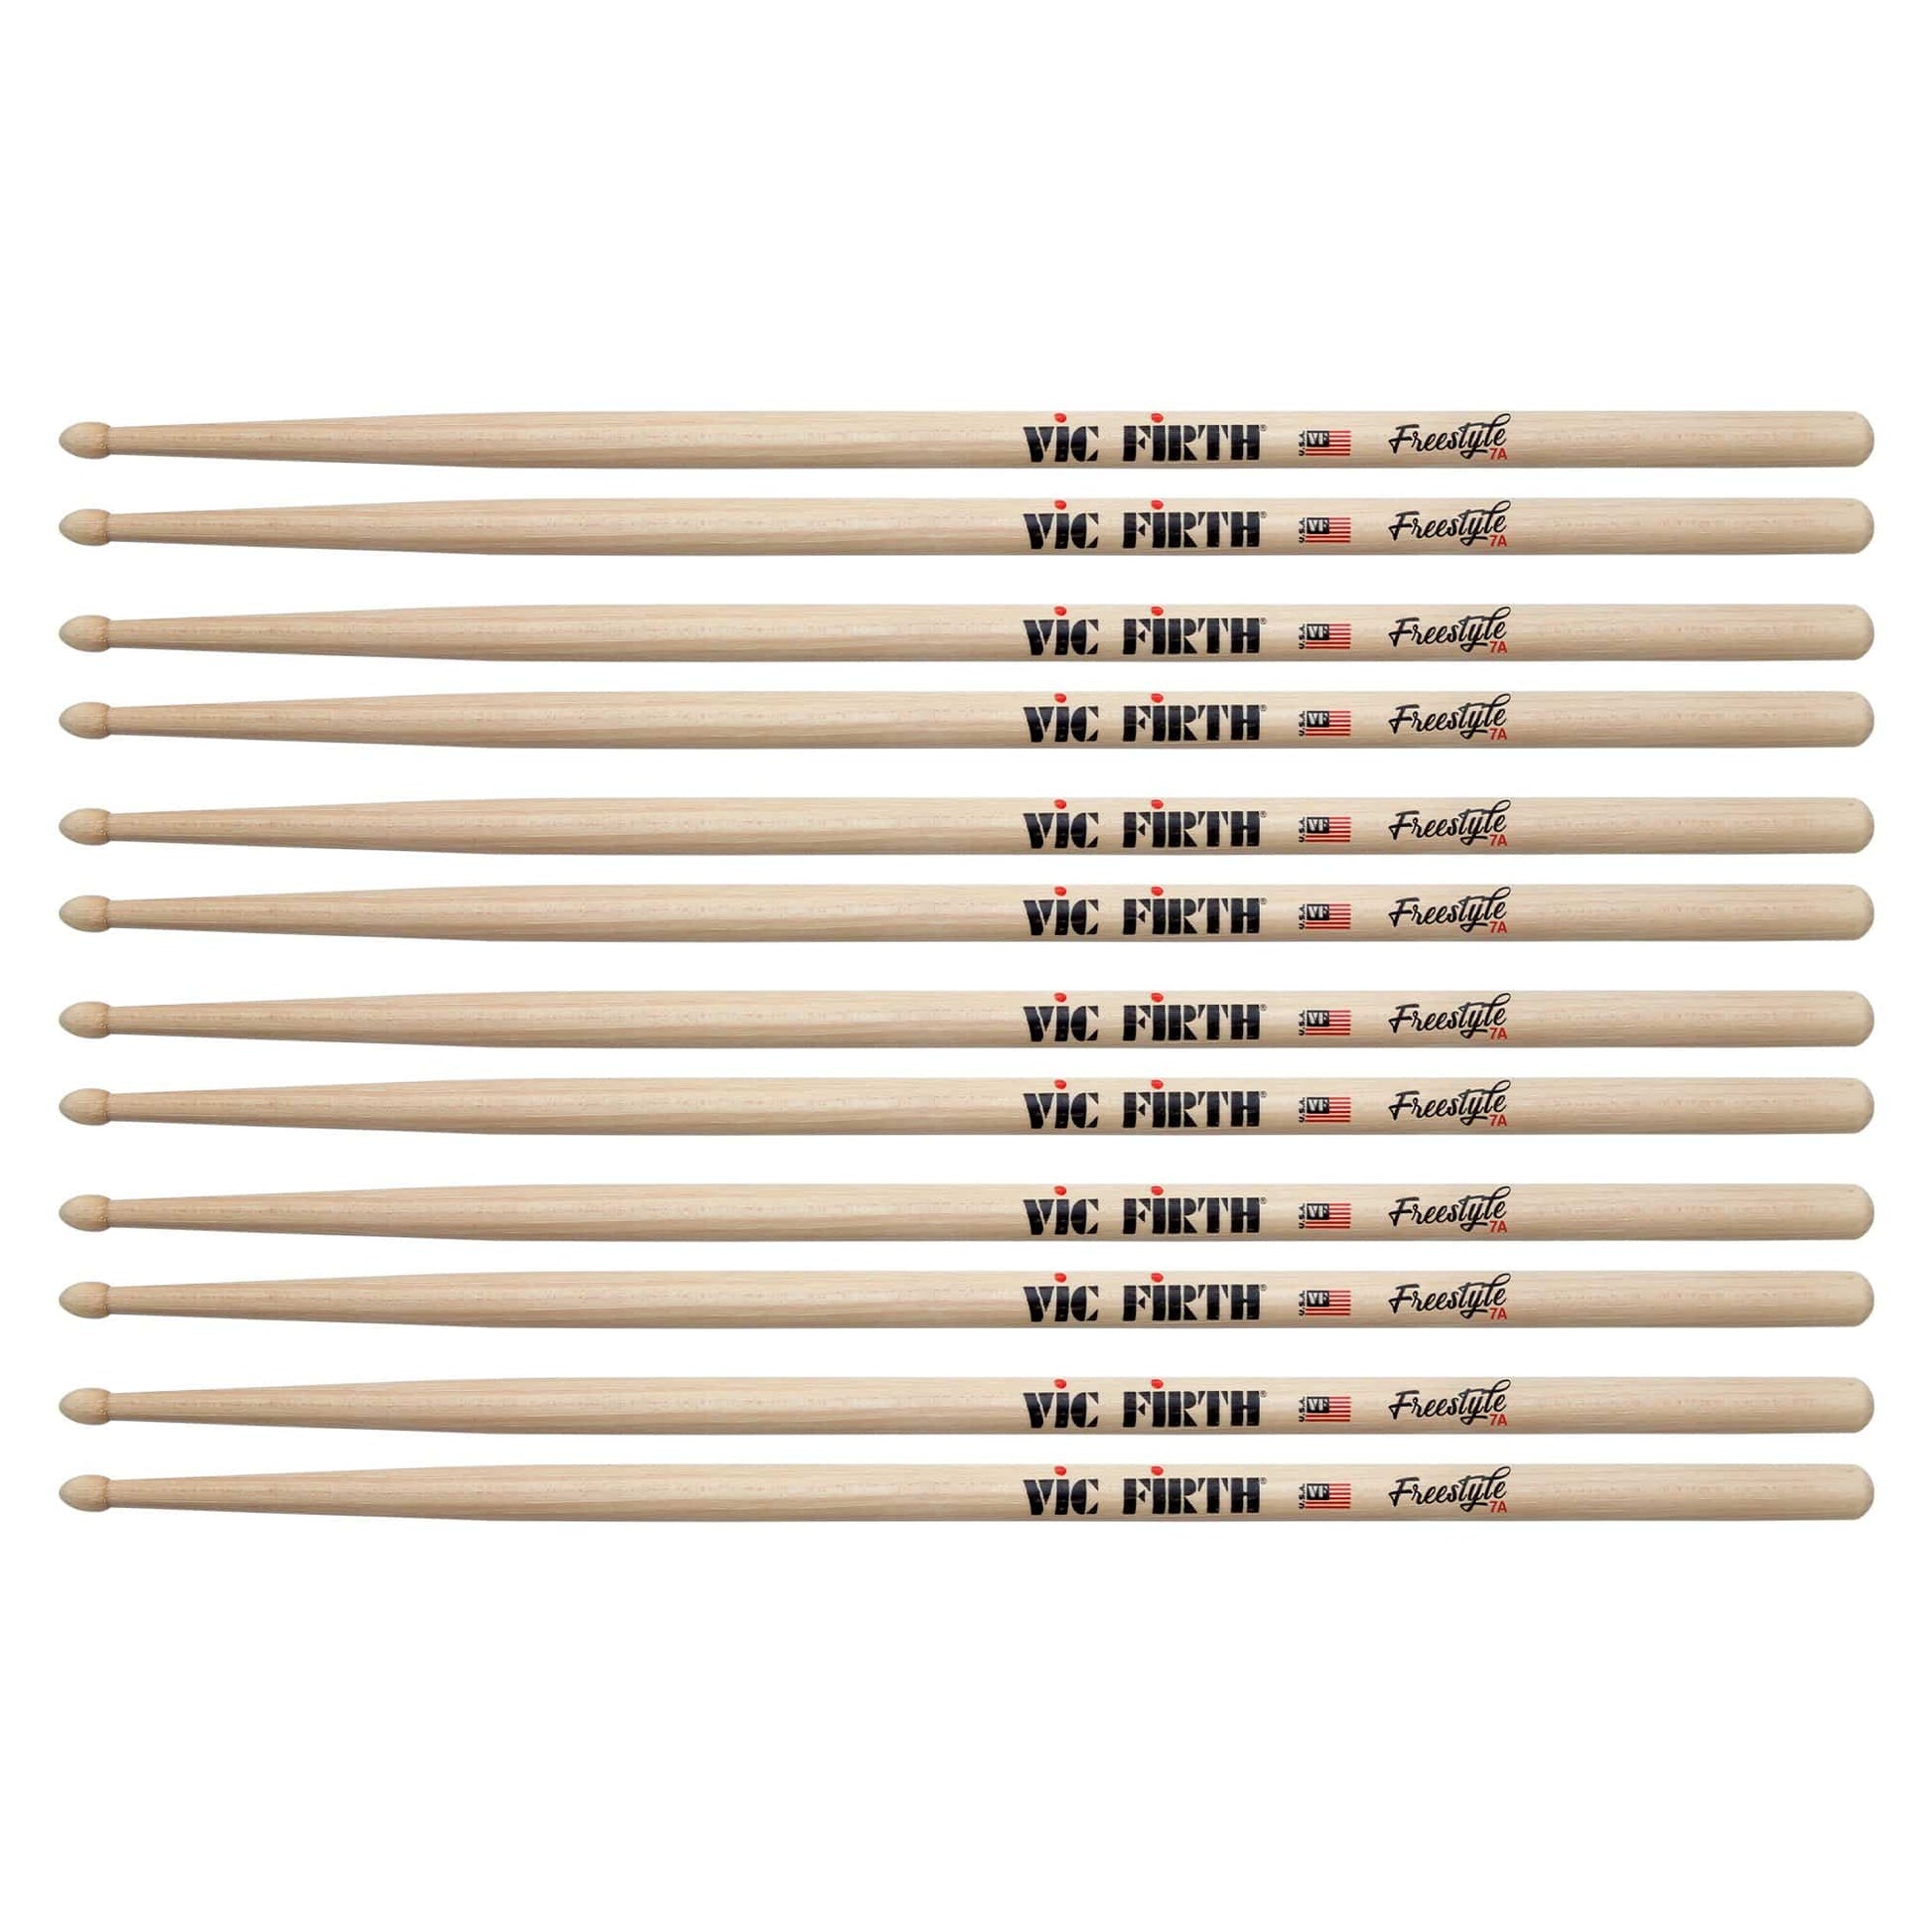 Vic Firth American Concept Freestyle 7A Wood Tip Drum Sticks (6 Pair Bundle) Drums and Percussion / Parts and Accessories / Drum Sticks and Mallets